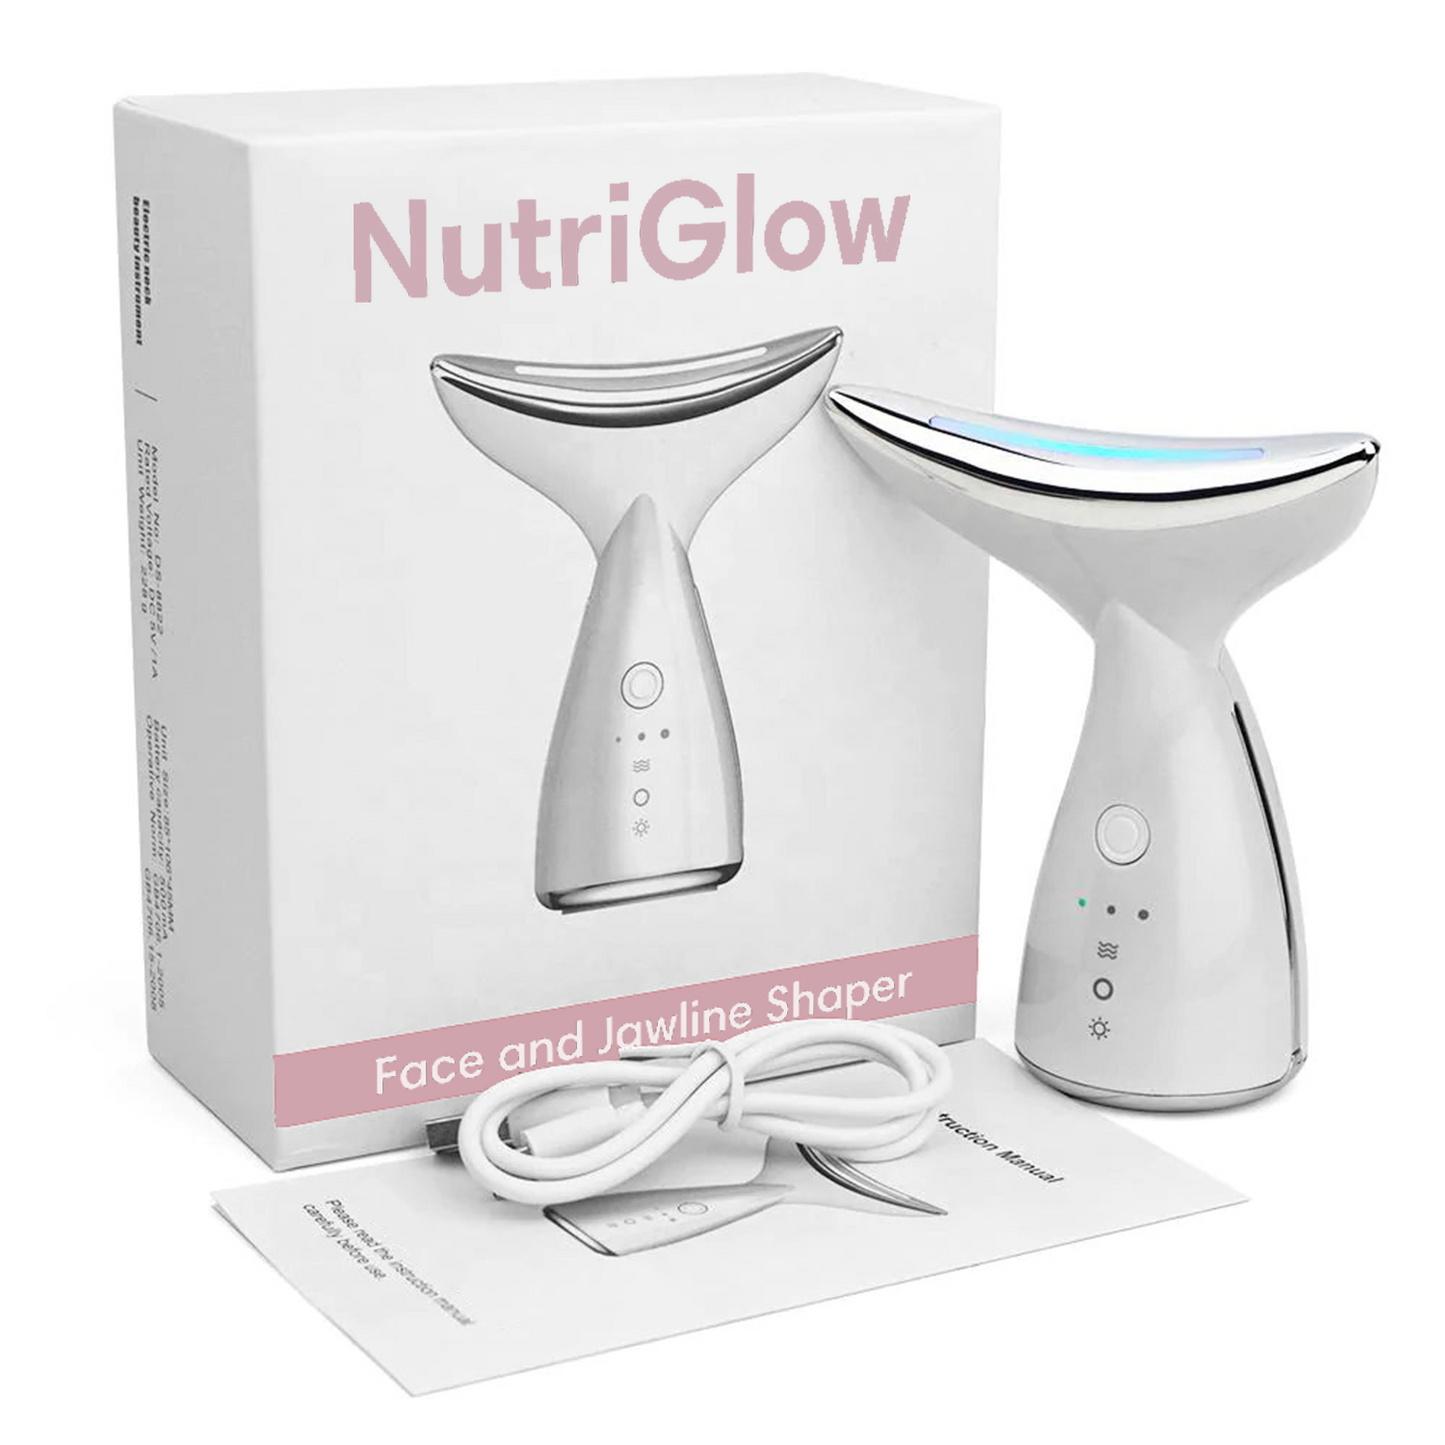 Nutriglow™ Face and Jawline Shaper